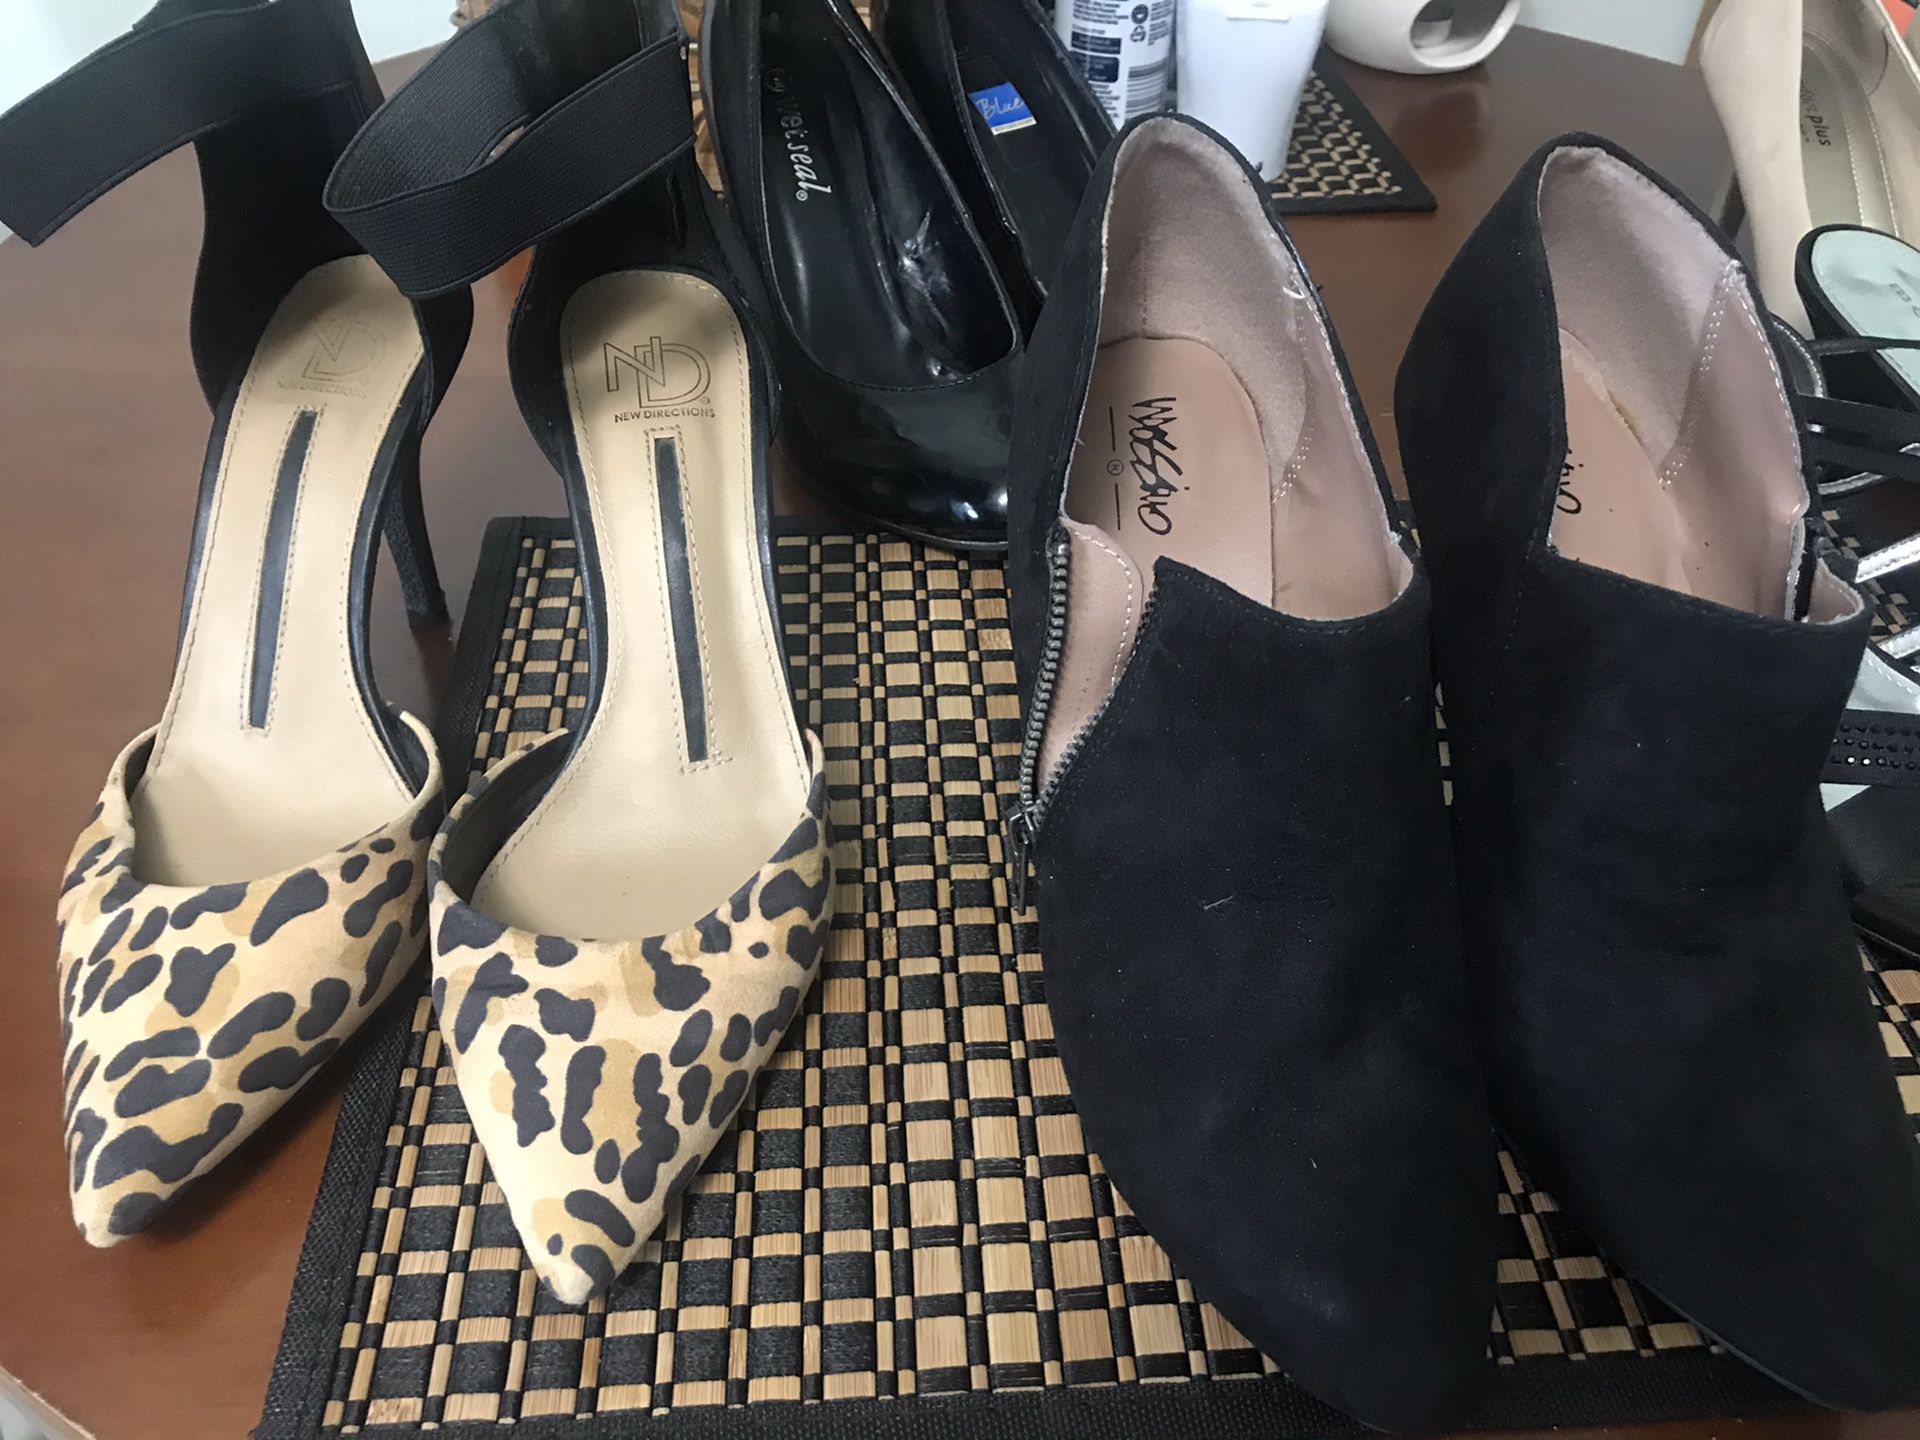 Lot of 5 pair high heels shoes